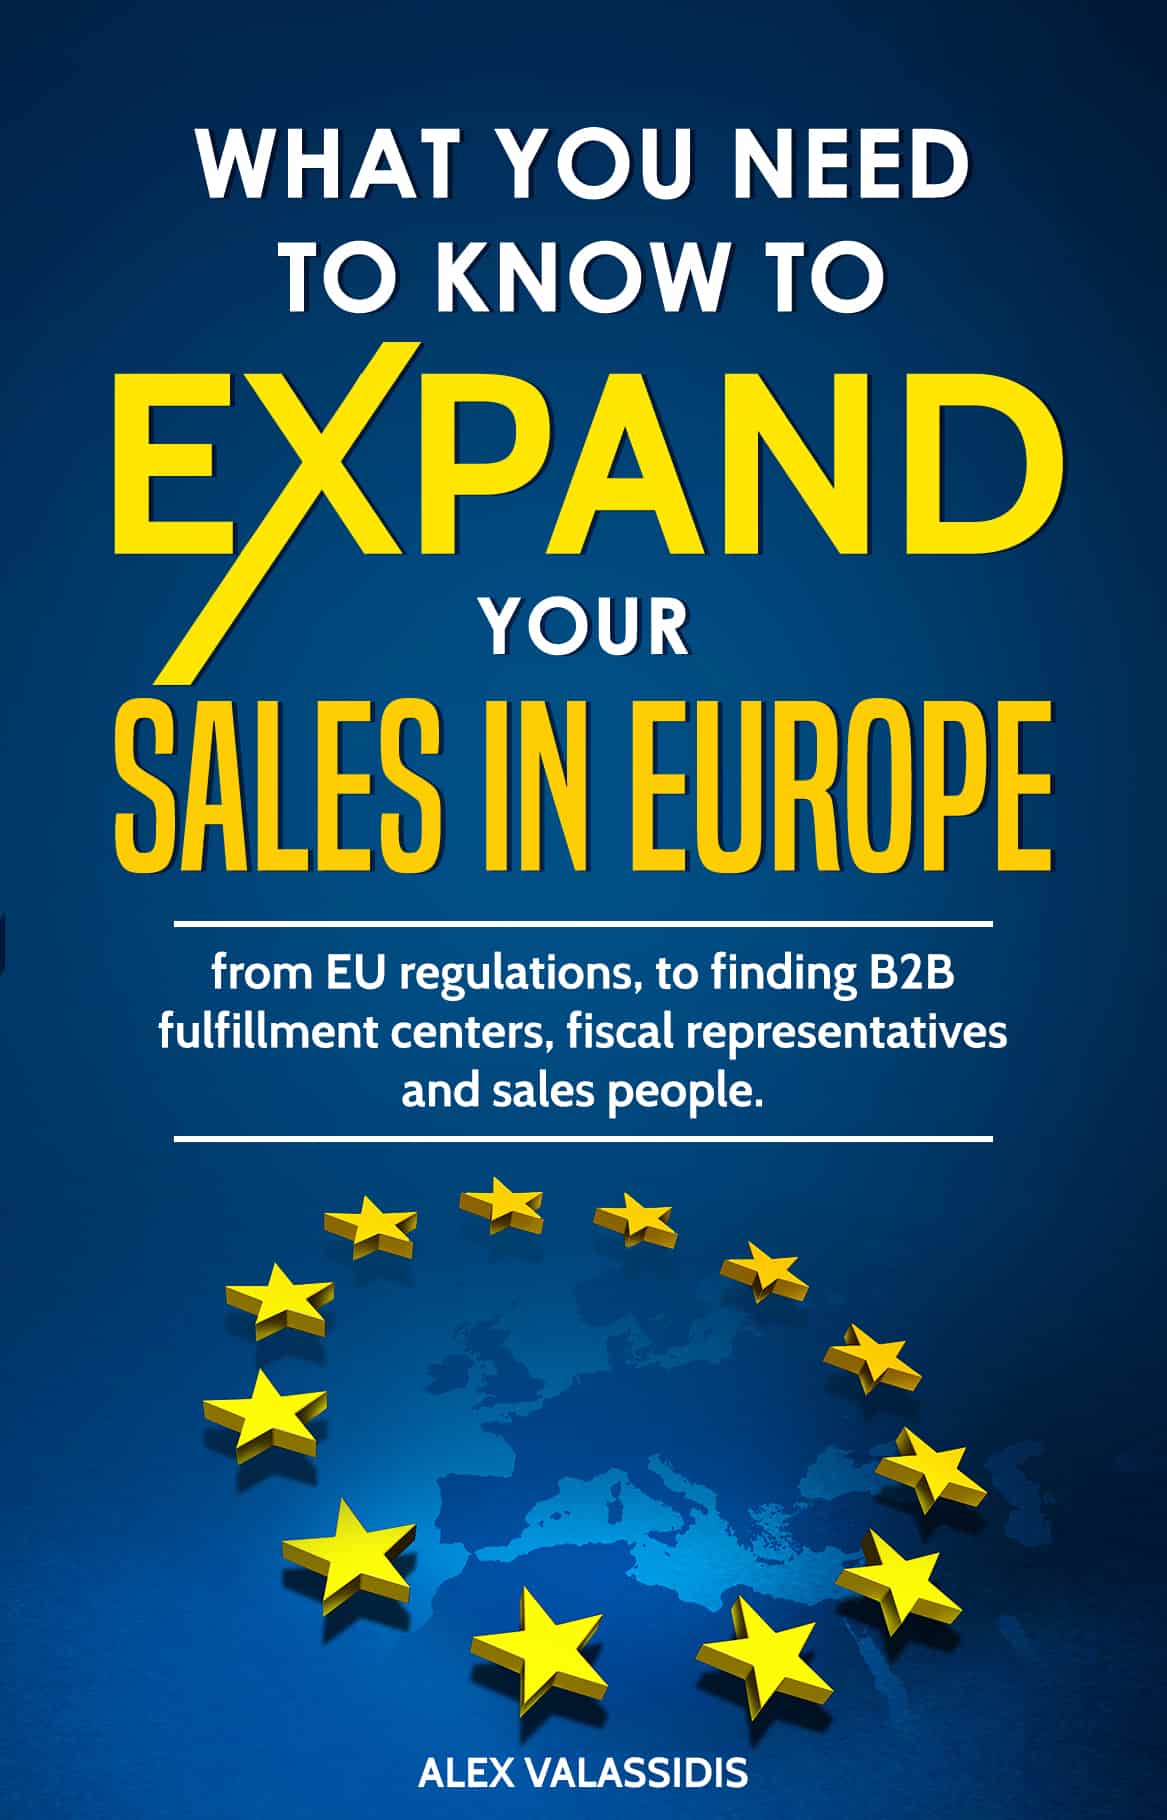 expand your sales in Europe